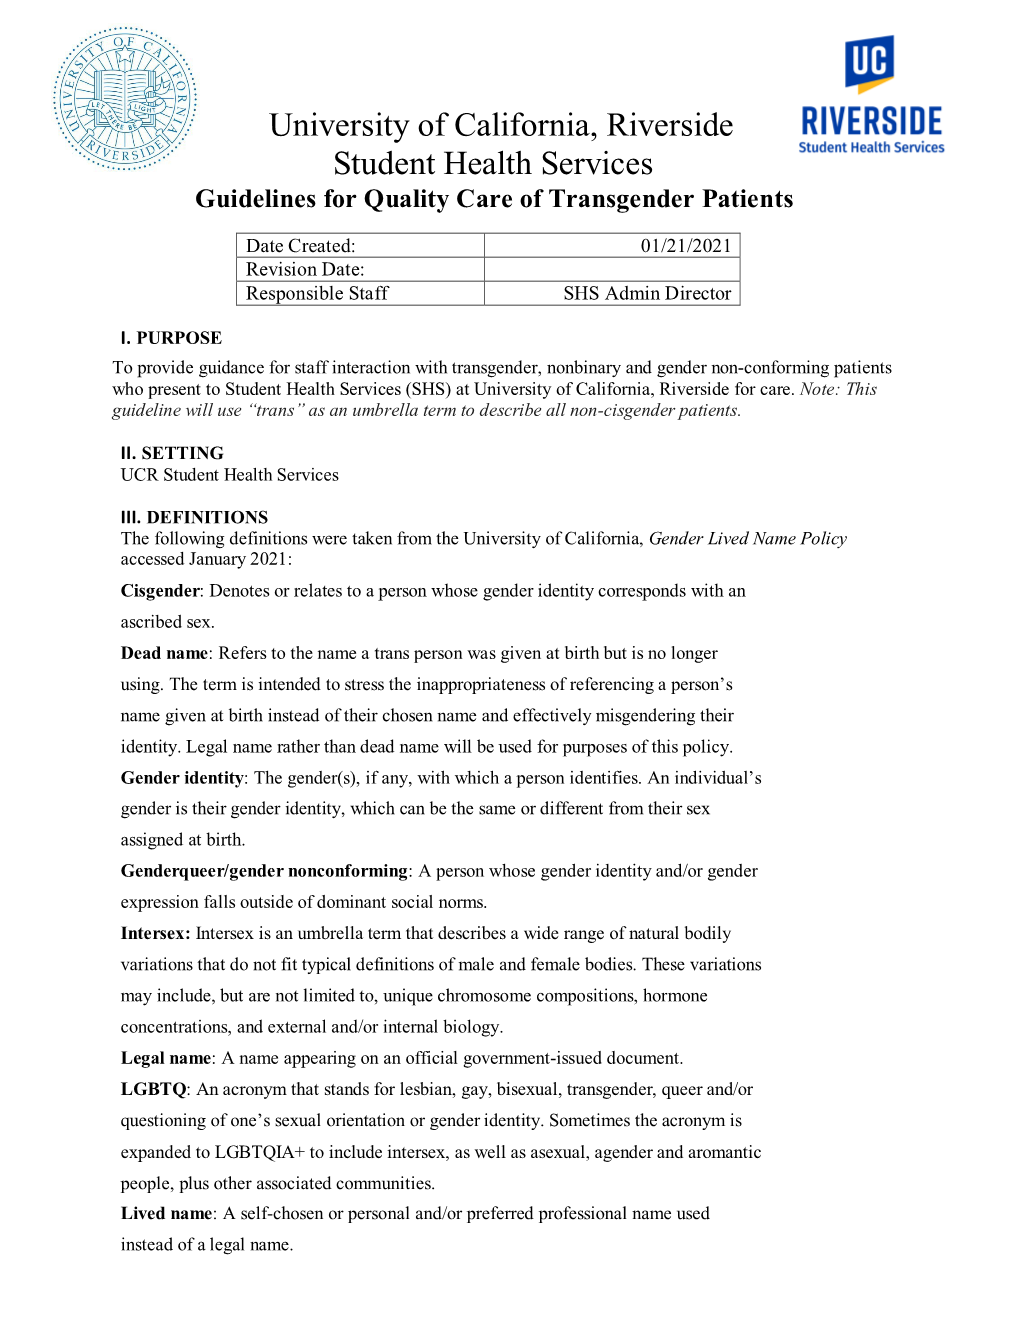 Guidelines for Quality Care of Transgender Patients